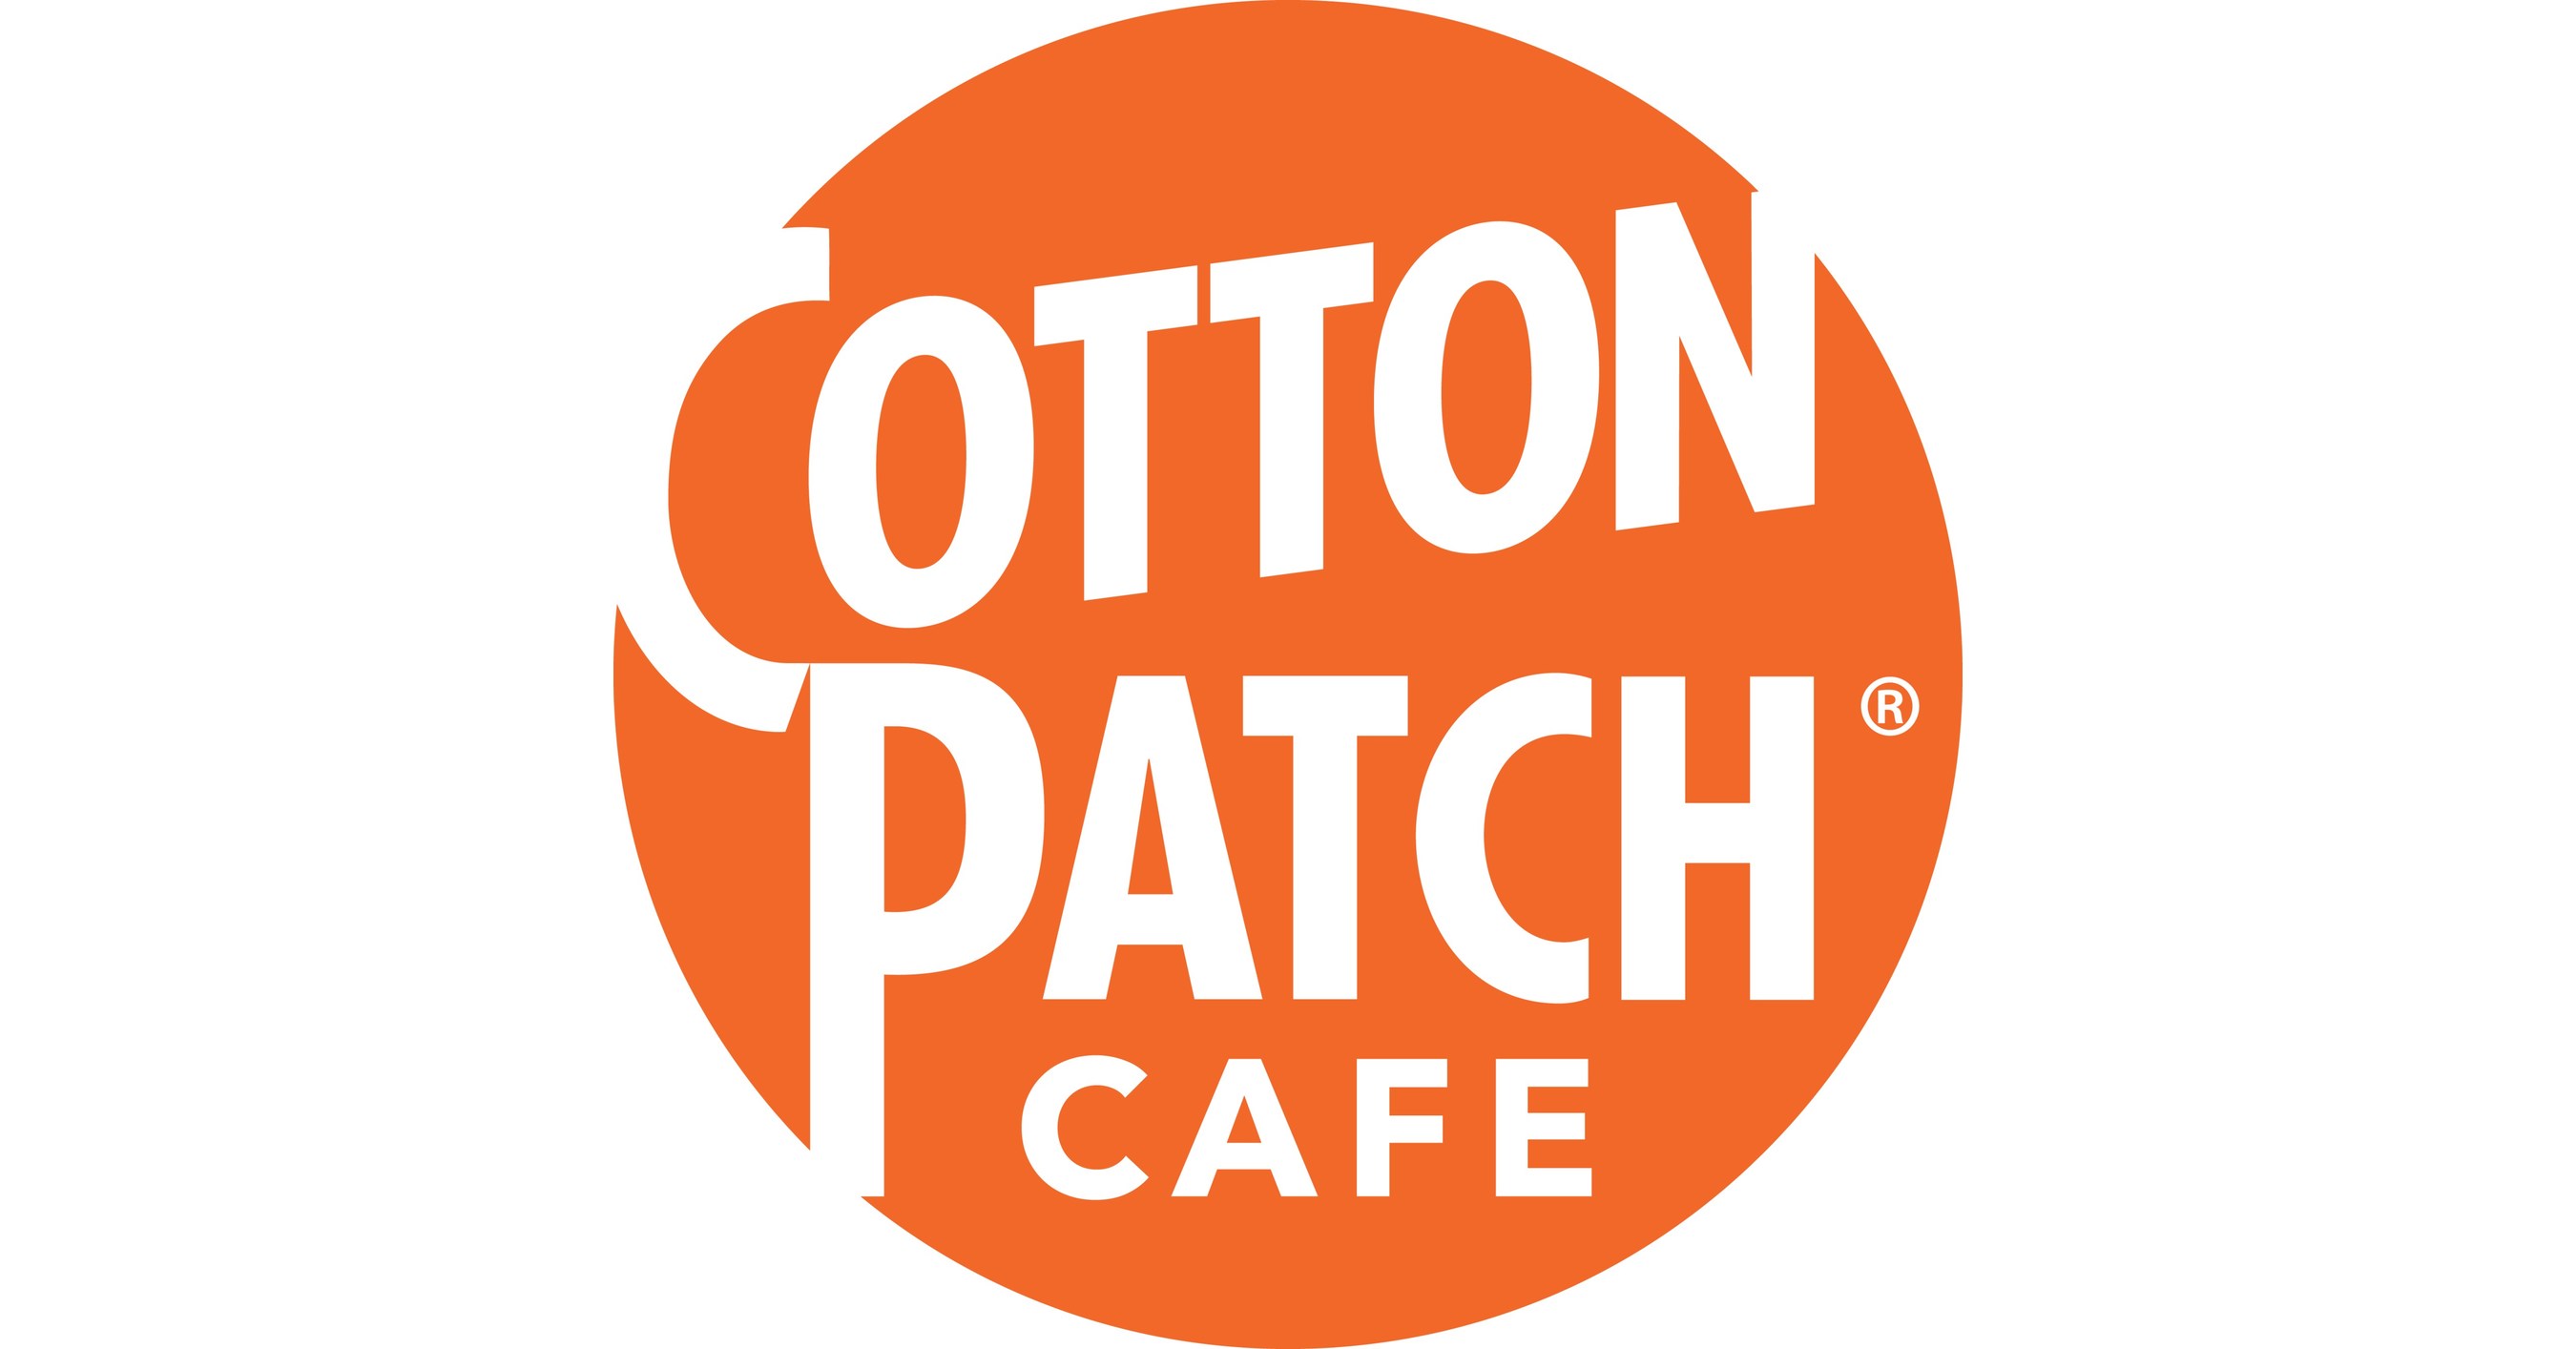 Cotton Patch Cafe Expands Its C-Suite From Within Its Ranks